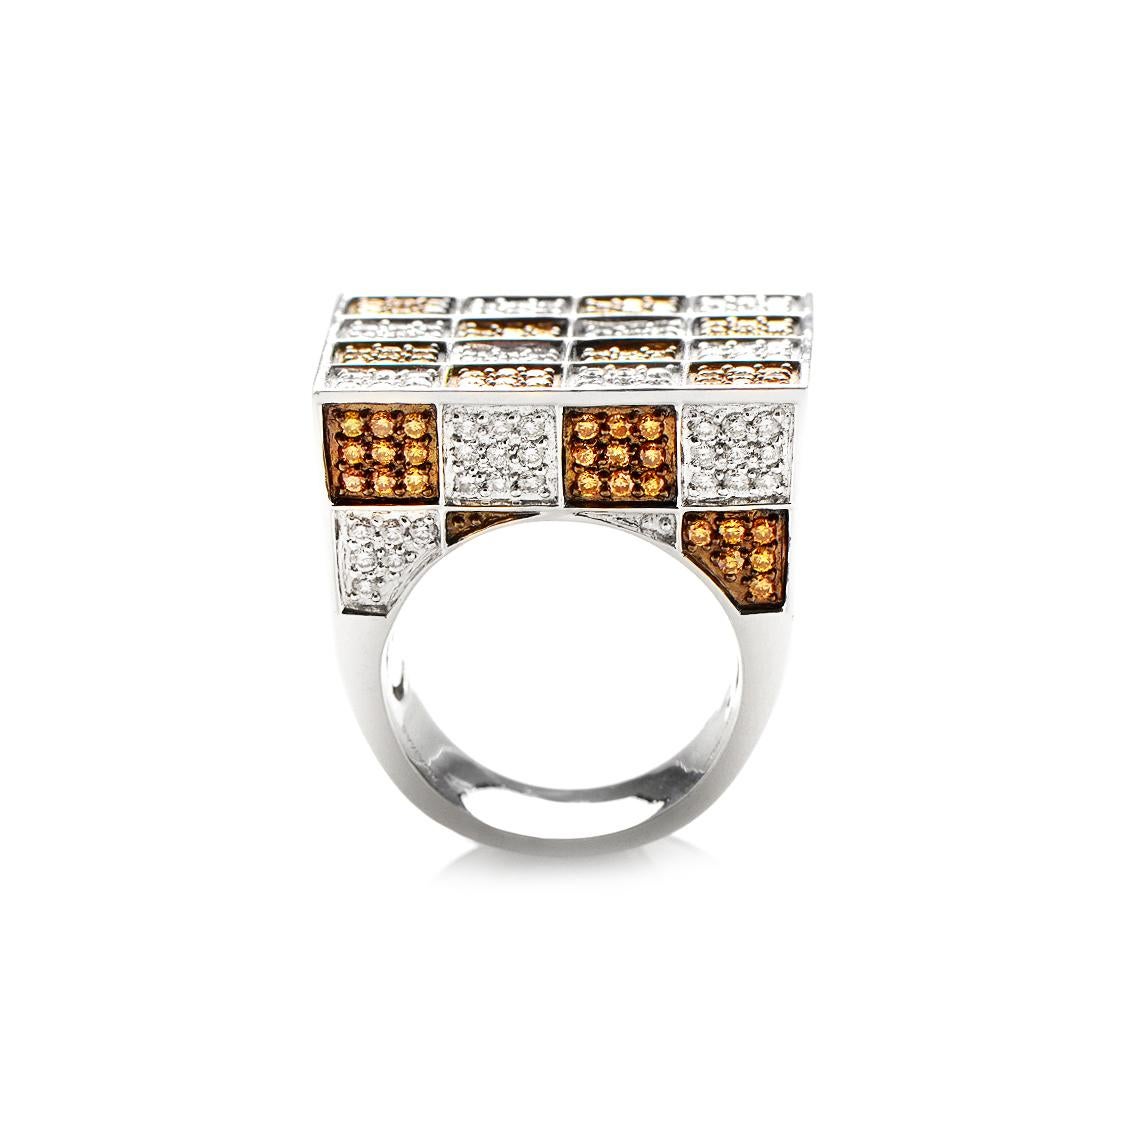 This Adamas cocktail ring is absolutely stunning and compels with its exceptionally unconventional design and dazzling diamond décor. The checkered motif is the star of the show in this exquisitely designed piece and adds a delightful, edgy feel to